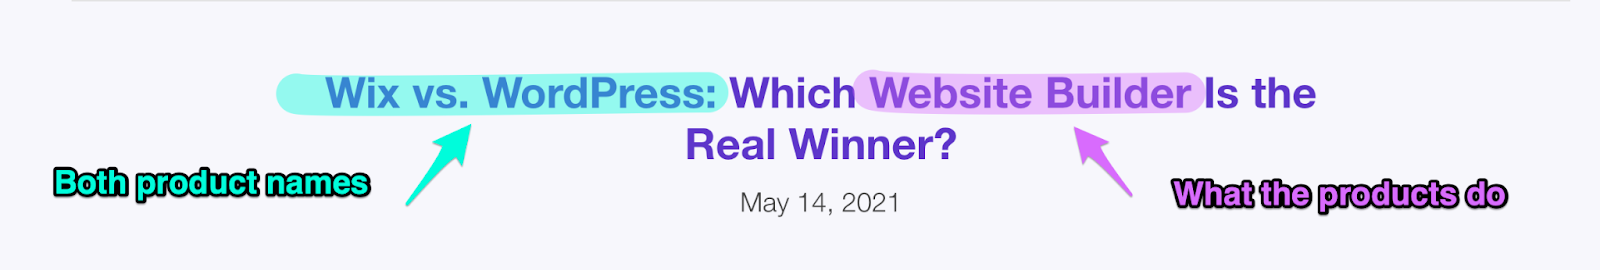 one way how to write product comparison posts is to use a headline with both product names and its product category like this wix vs. wordpress example